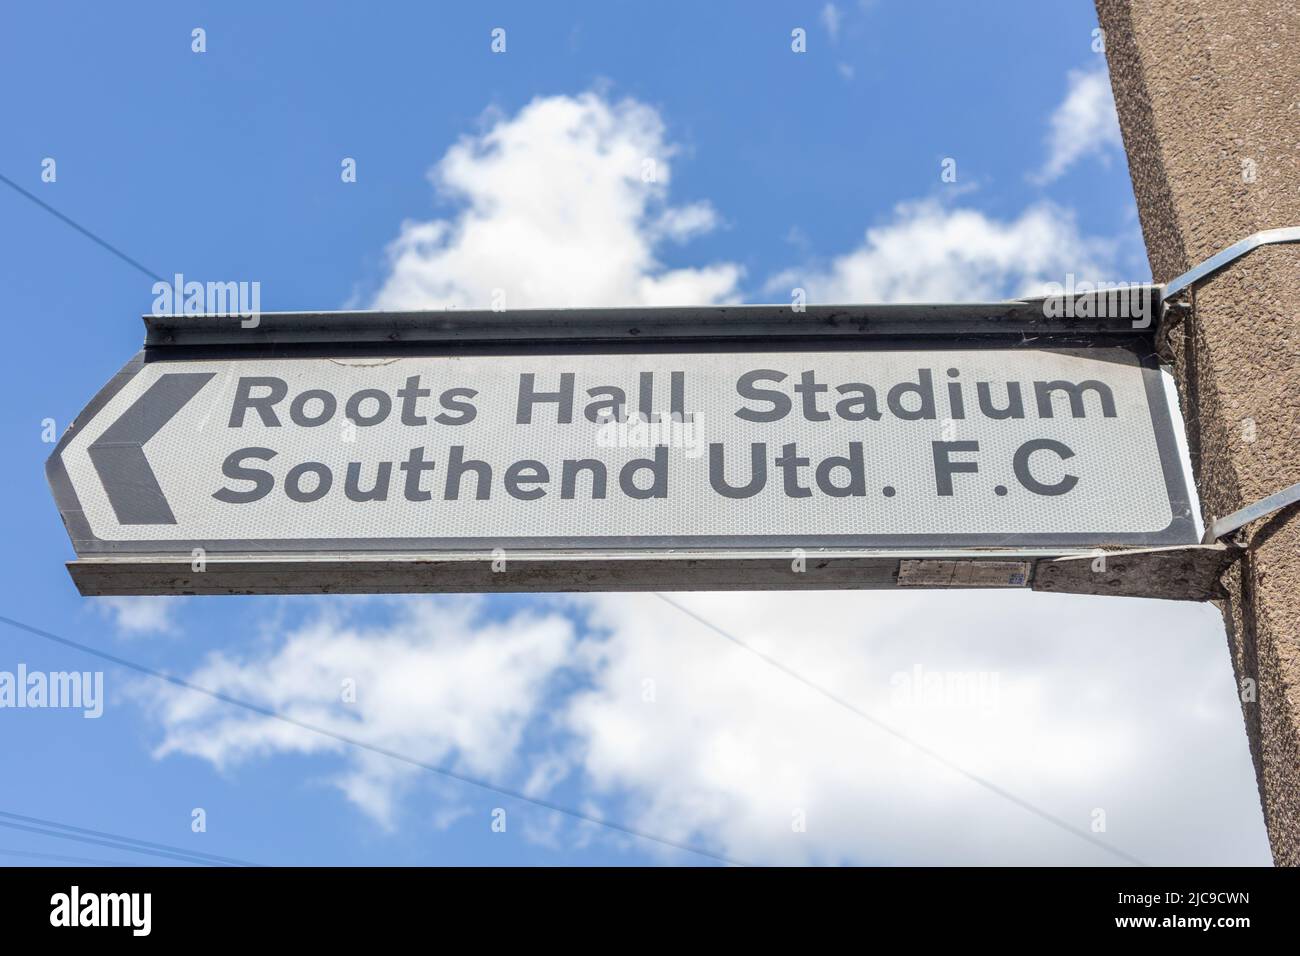 Southend on Sea, UK. 11th Jun, 2022. A sign pointing towards the football ground.. Scenes near Prittlewell Station, Southend on Sea, the area Simon Dobbin was left with permanent brain damage following an assault after a Southend Utd vs Cambridge Utd match on 21st March, 2015. Mr Dobbin died on 21st October, 2020. He was 48 years old. Earlier in the week, 10th June 2022, Essex Police arrested five men in connection with the assault. Penelope Barritt/Alamy Live News Stock Photo